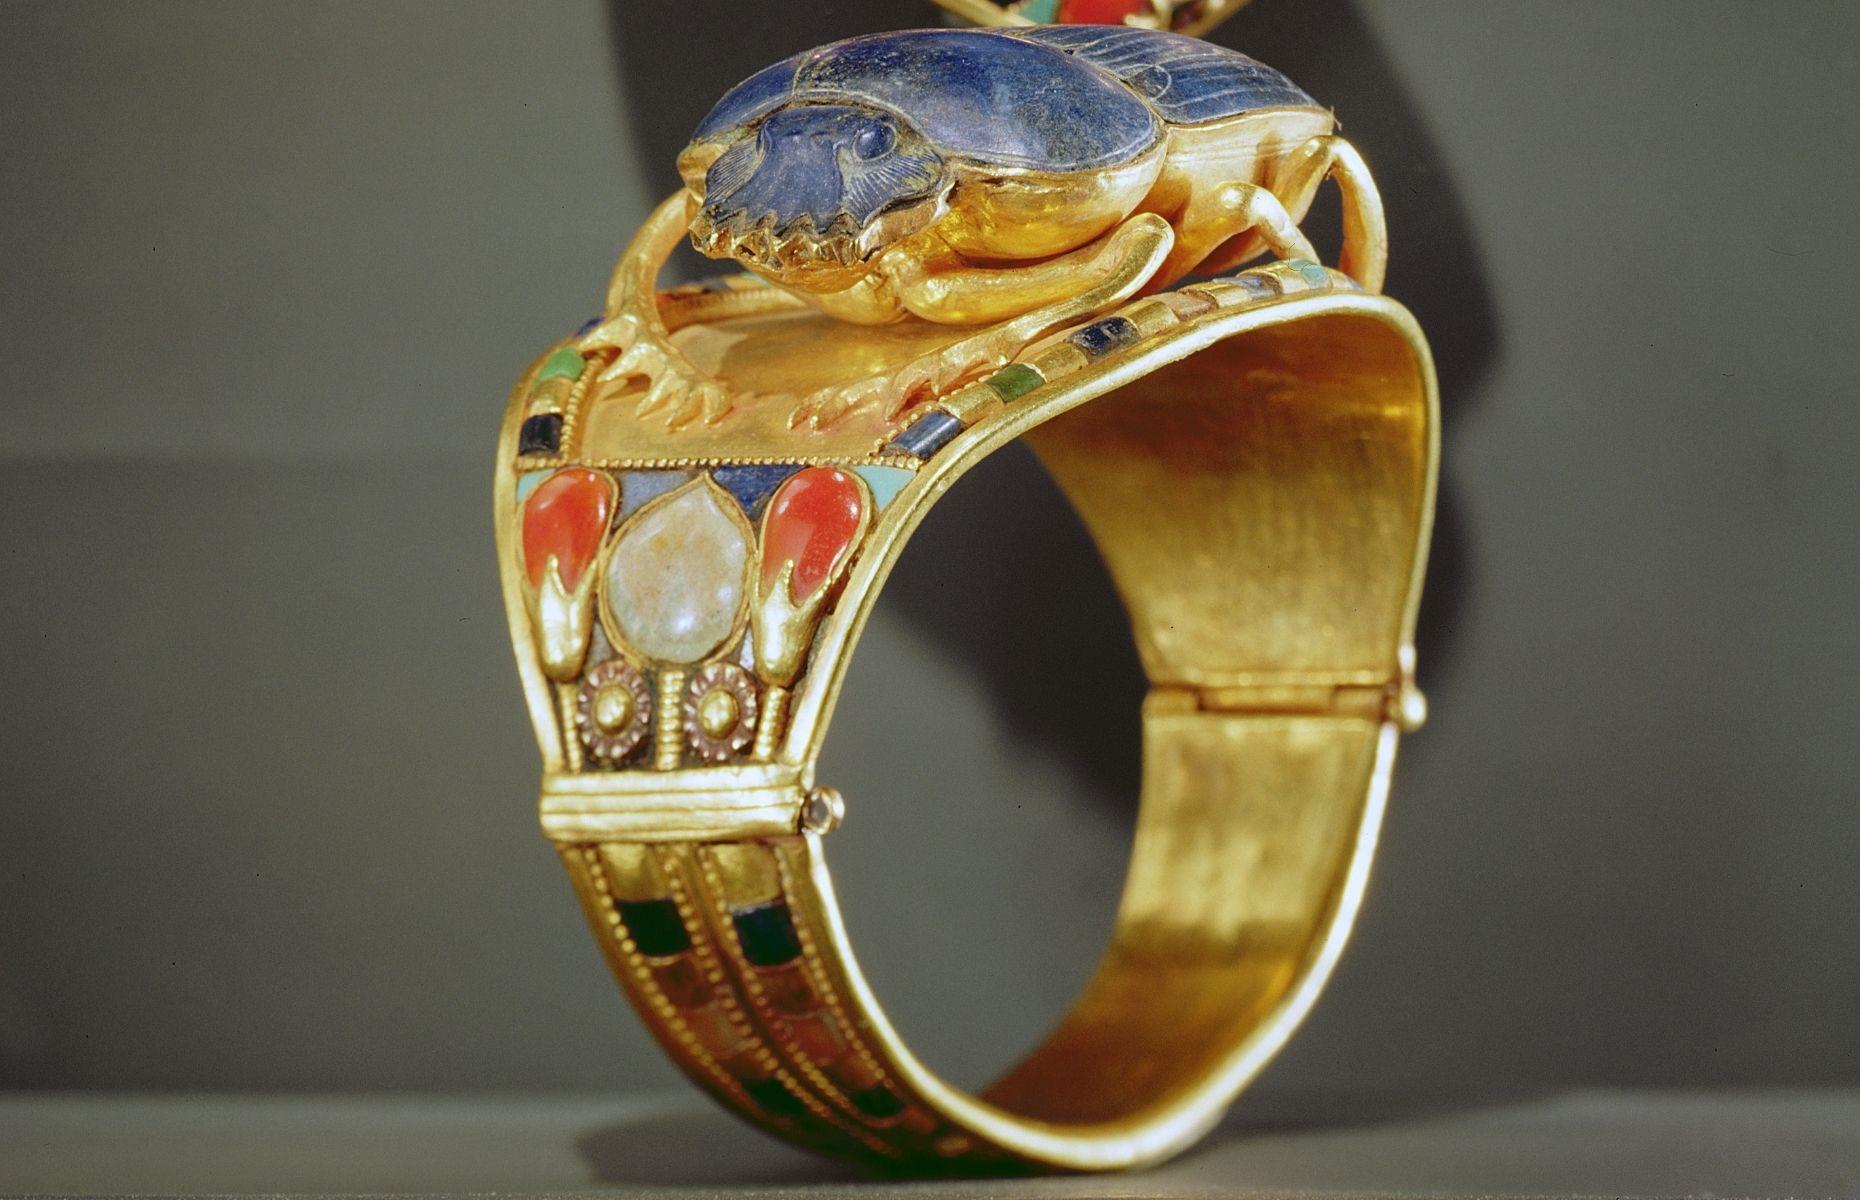 <p>Ornate jewellery was commonly stored inside Egyptian pyramids, either as divine offerings or to accompany the deceased into the afterlife. This spectacular scarab bracelet is just one of the items found inside Tutankhamun's tomb. Formed from gold and lapis lazuli, the intricate trinket is a gorgeous example of ancient craftsmanship. Regardless of gender or status, the Egyptians loved jewellery, and over the centuries endless precious charms and ornaments have been discovered.</p>  <p><a href="https://www.loveexploring.com/galleries/154669/atlantis-and-other-incredible-lost-cities-around-the-world?page=1"><strong>Discover the possible locations of legendary Atlantis</strong></a></p>